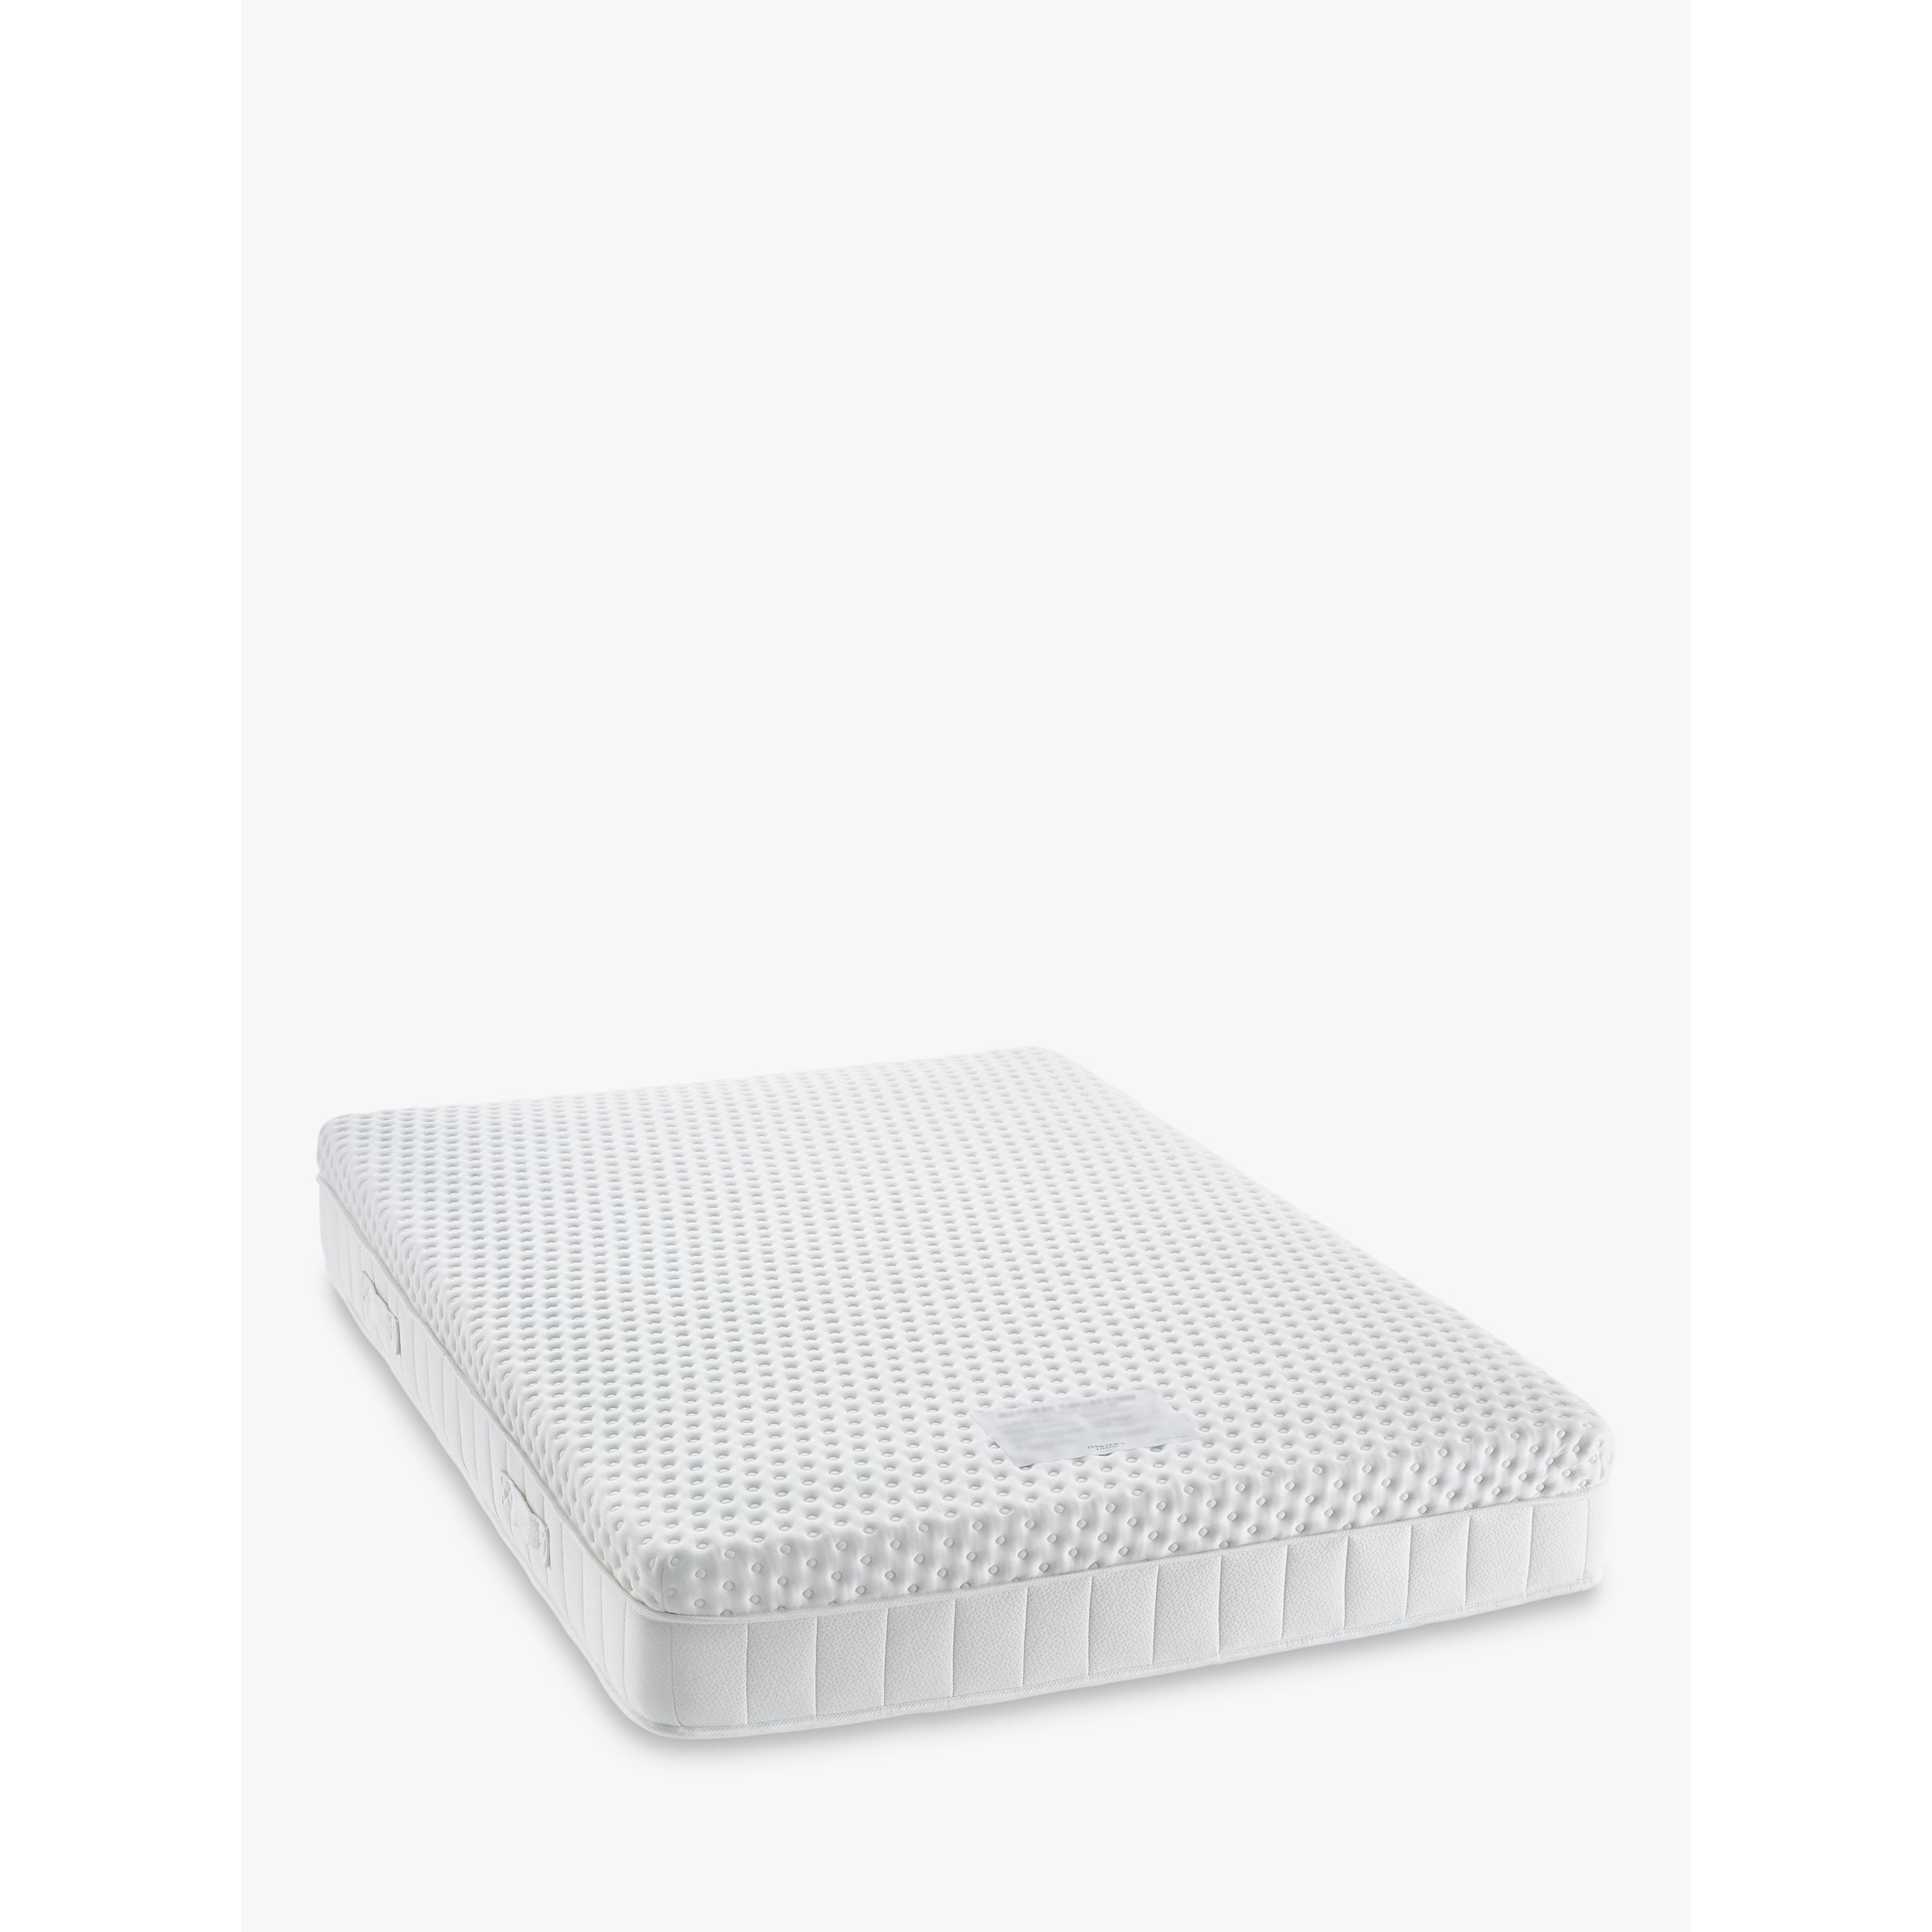 John Lewis Climate Collection 1600 Pocket Spring Mattress, Medium/Firm Tension, Double - image 1